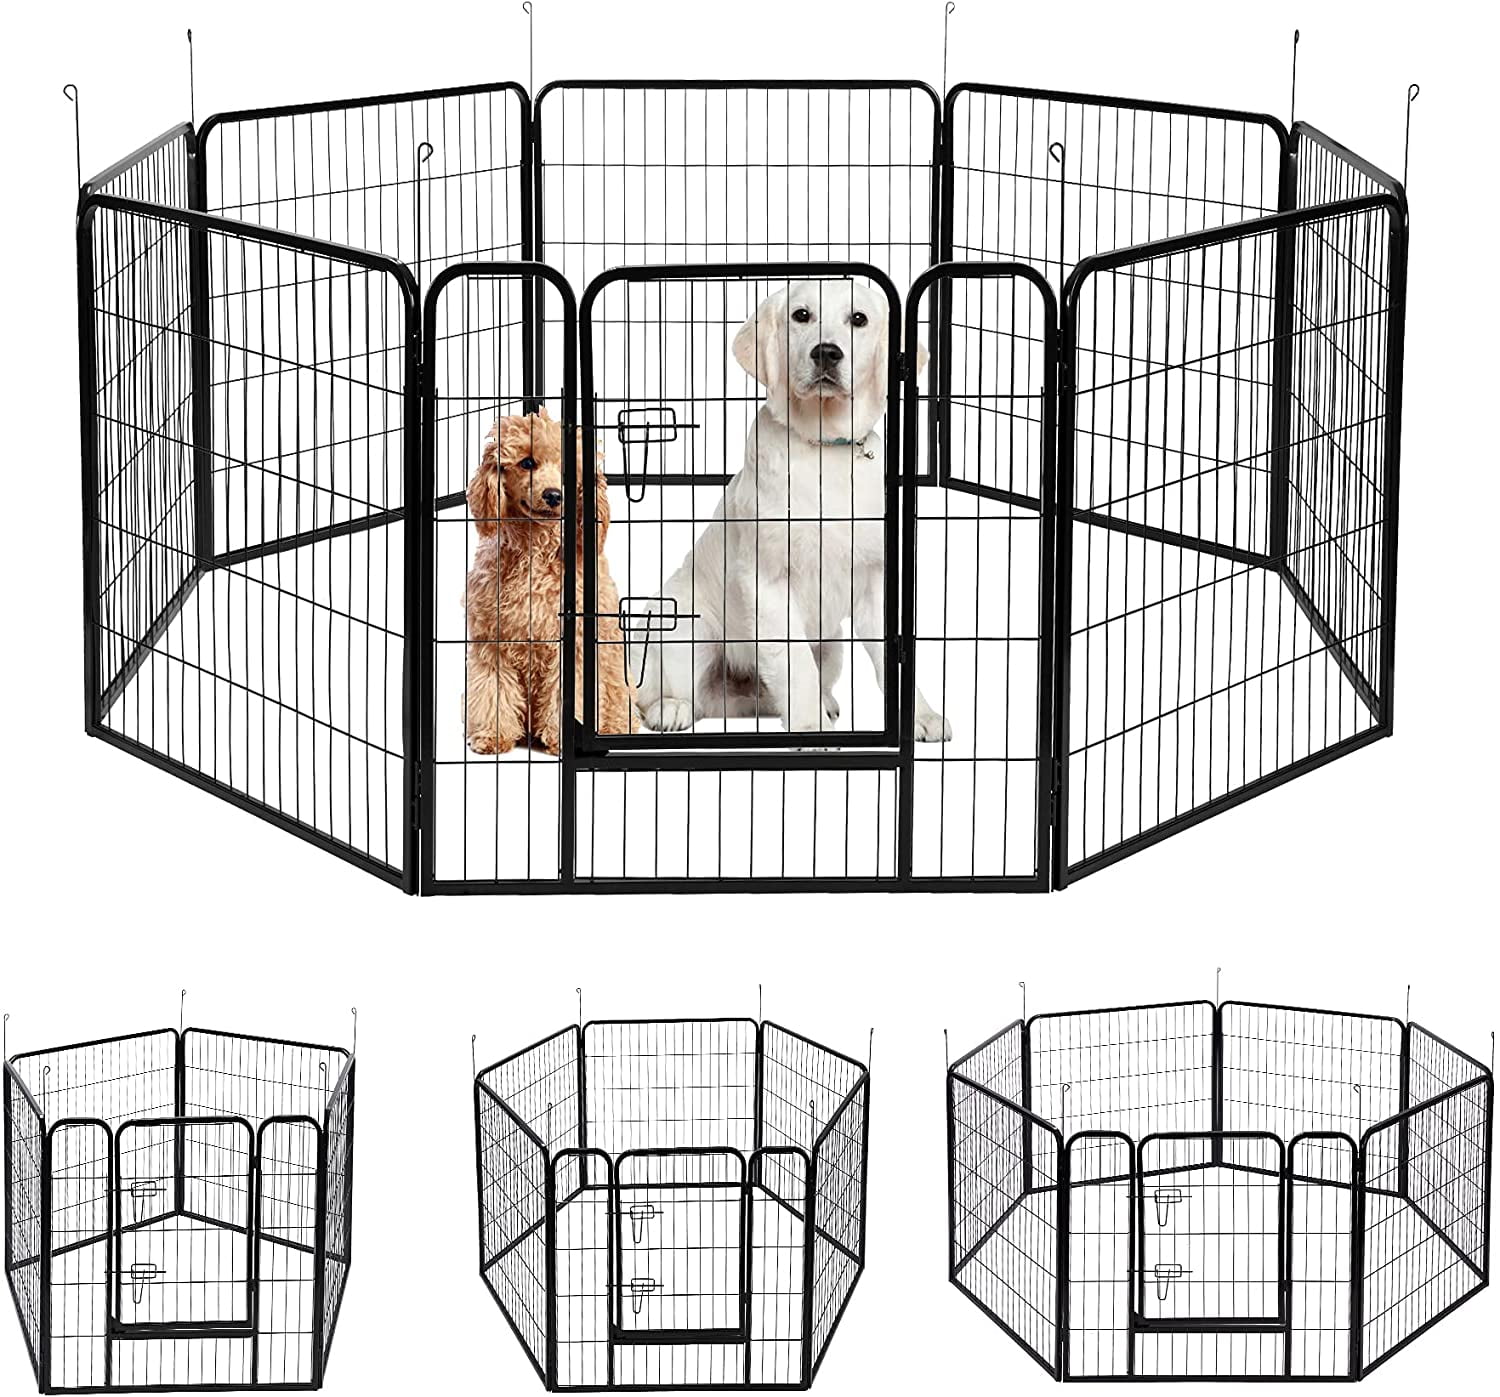 DIY Metal Wire Exercise Modular Enclosure Pet Run with Door for Dogs and Cats Small Pets Cage FIFIPETS Pet Playpen Hedgehog House Rabbit Hutch Guinea Pig Cage Gerbil Cage 12Panels+1door 